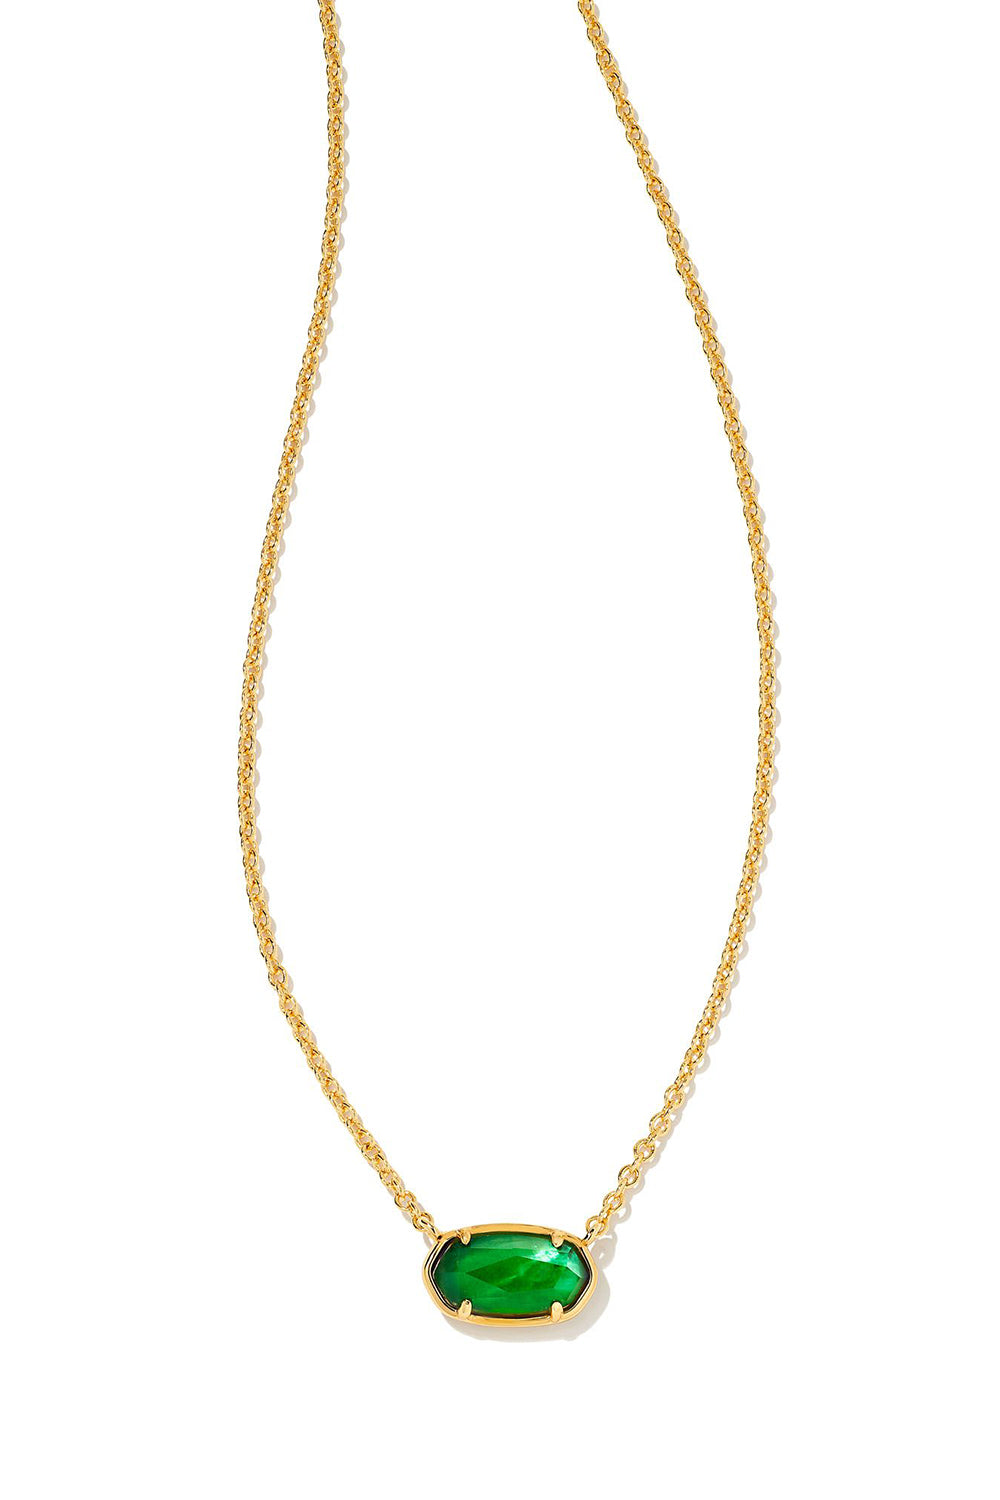 Grayson Crystal Pendant Necklace - Seasonal Colors - Gift and Gourmet